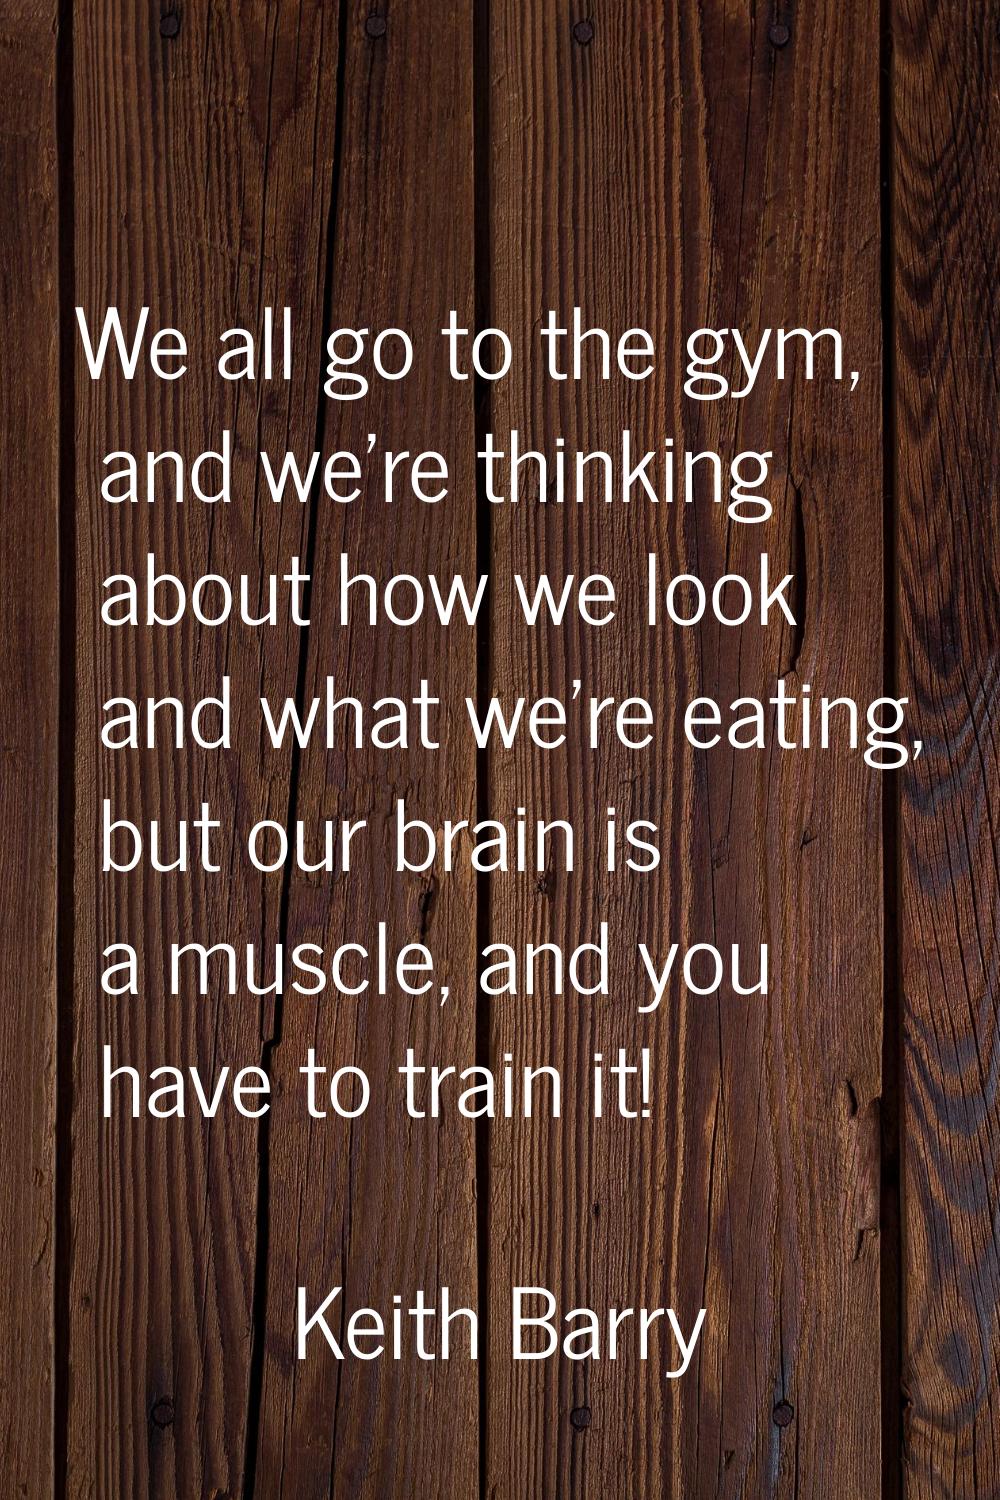 We all go to the gym, and we're thinking about how we look and what we're eating, but our brain is 